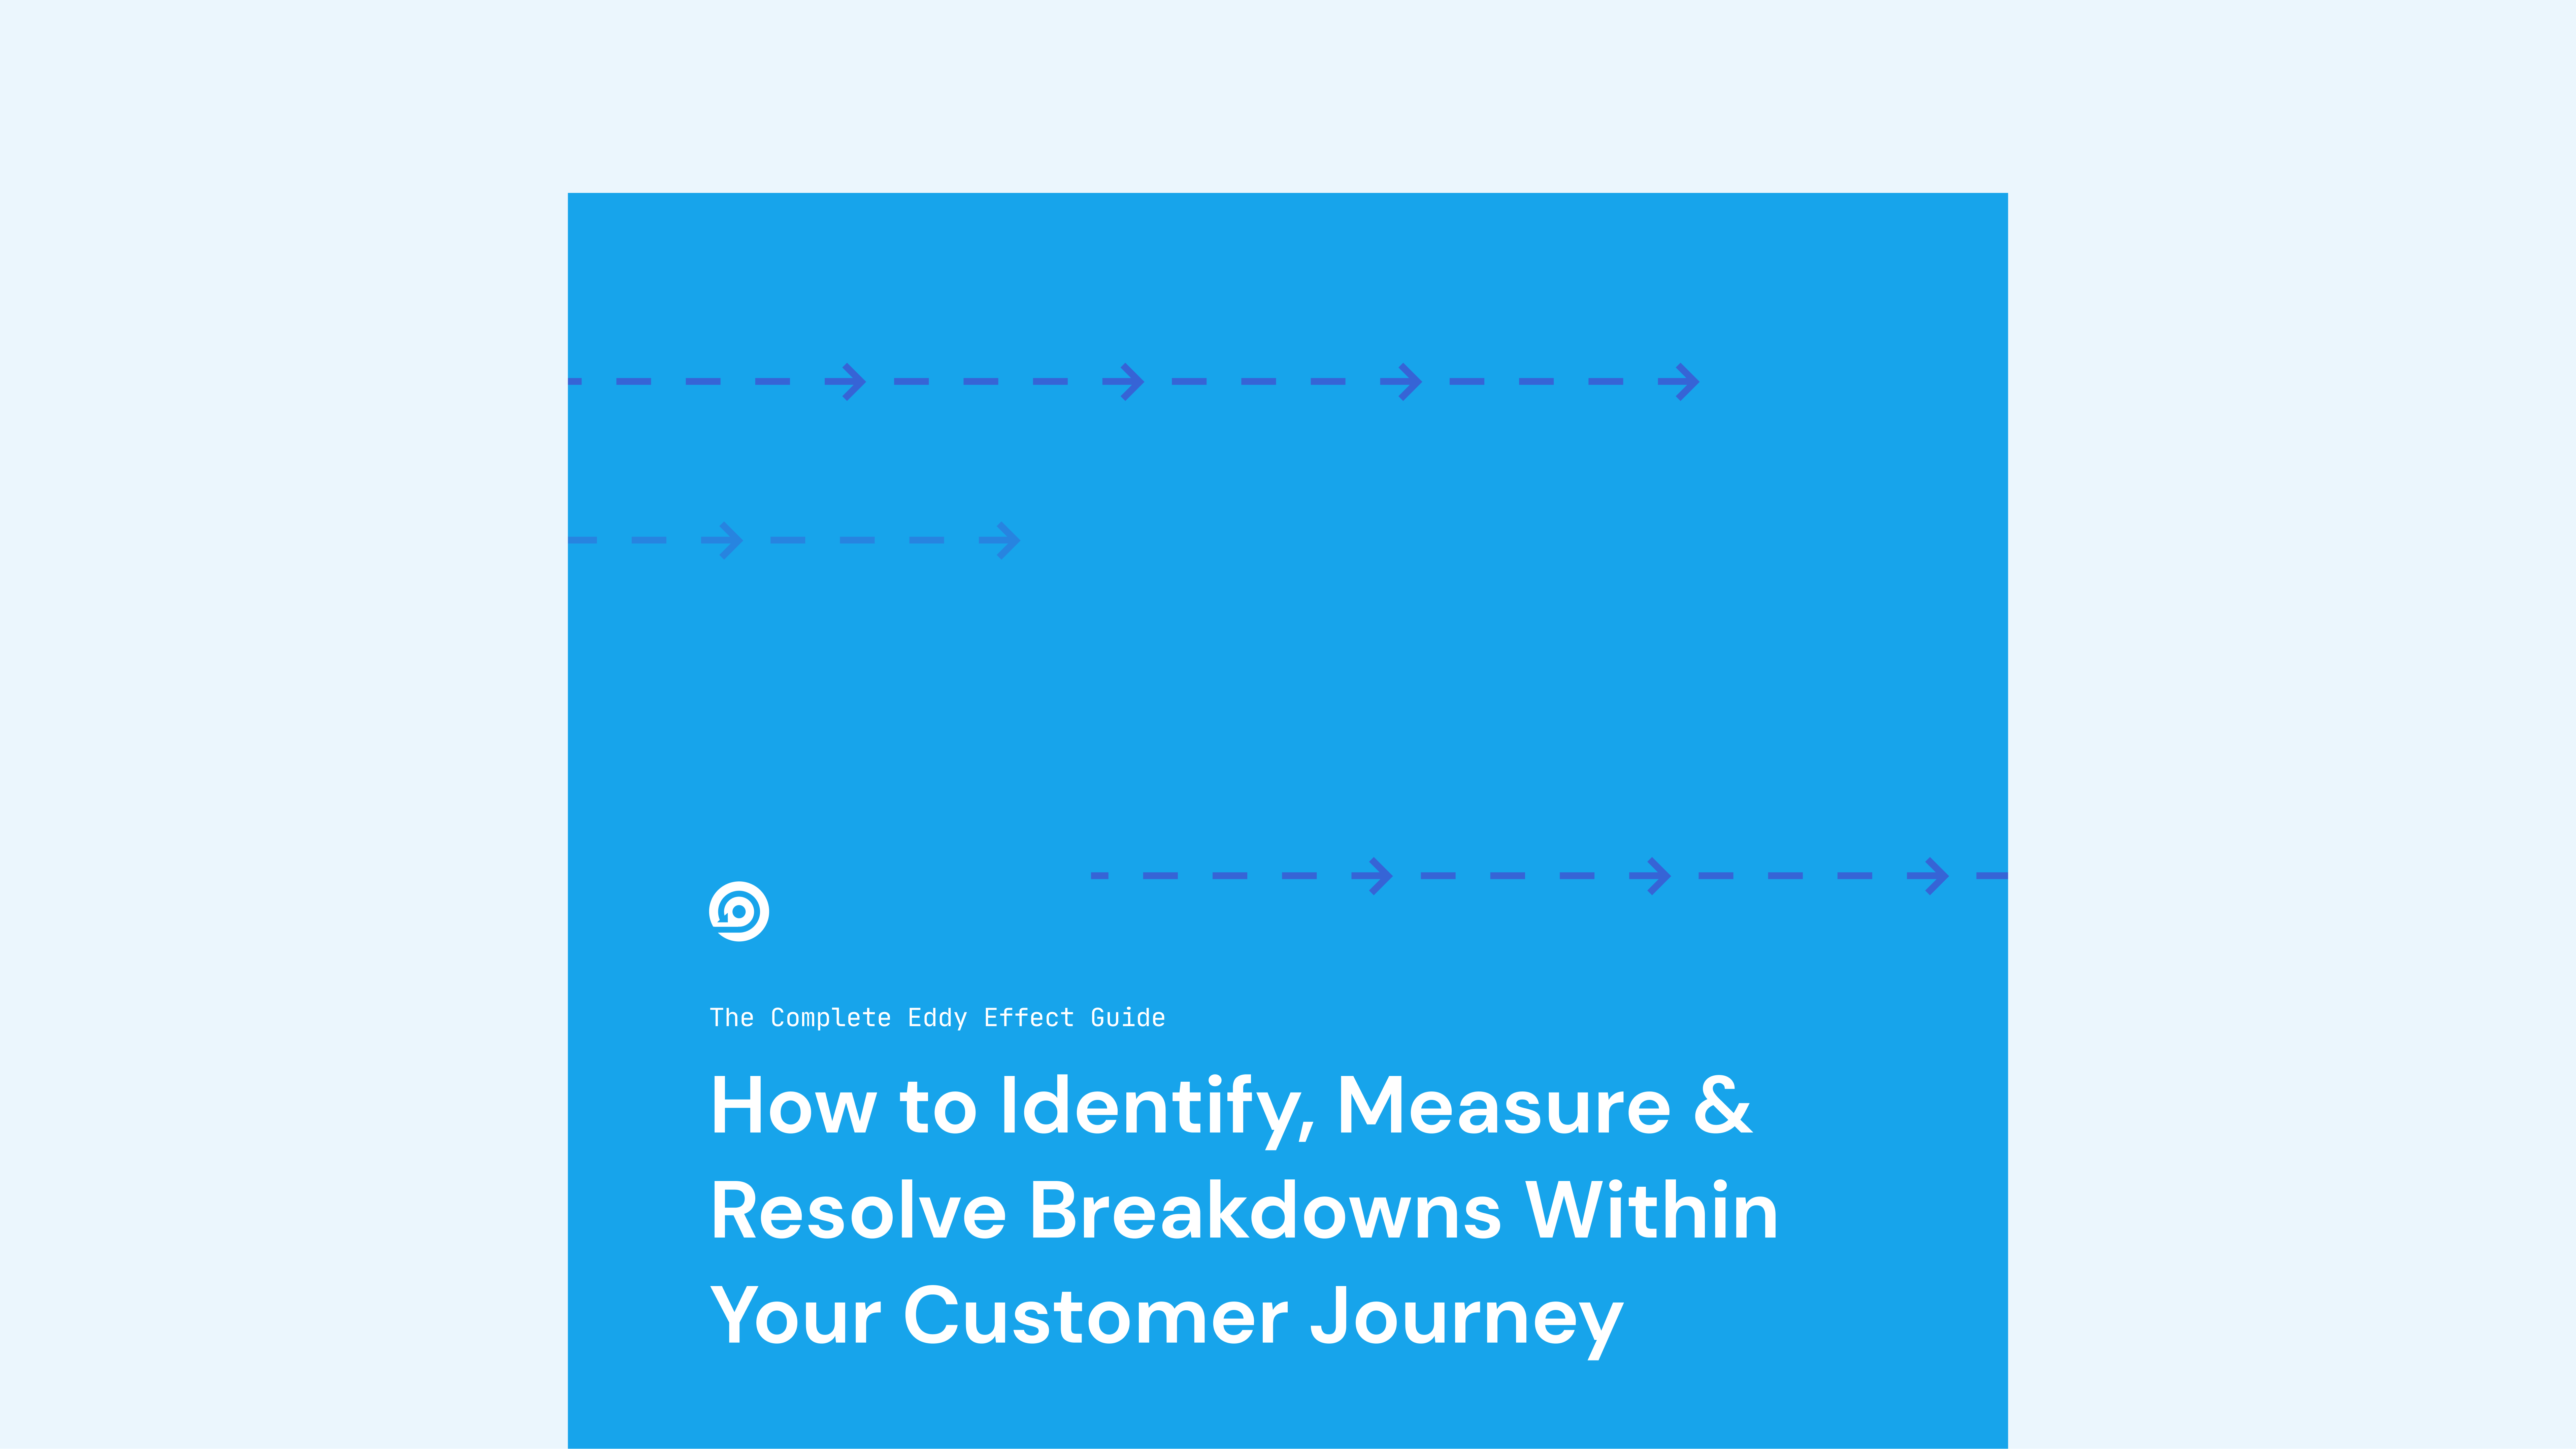 Eddy Effect Guide | How to Identify, Measure & Resolve Breakdowns Within Your Customer Journey